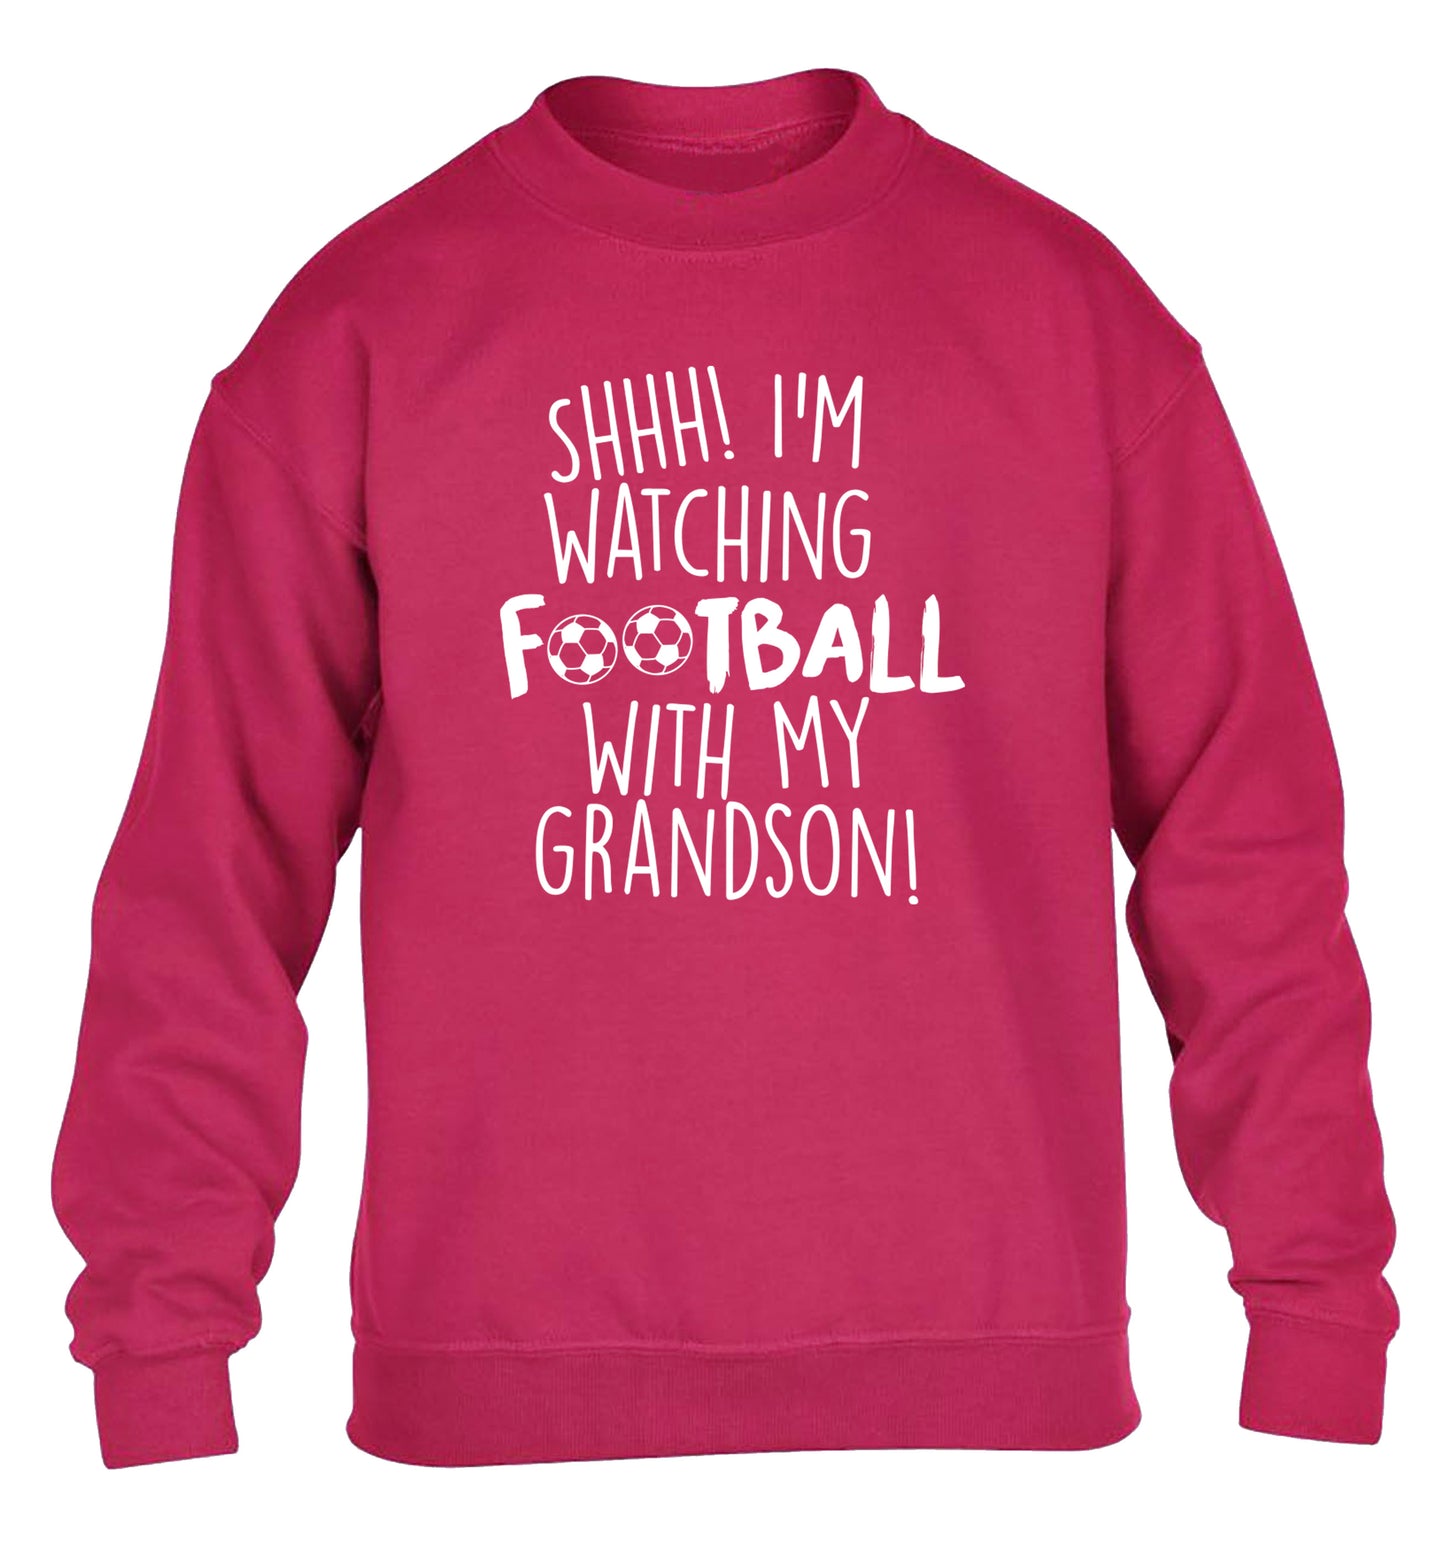 Shhh I'm watching football with my grandson children's pink sweater 12-14 Years